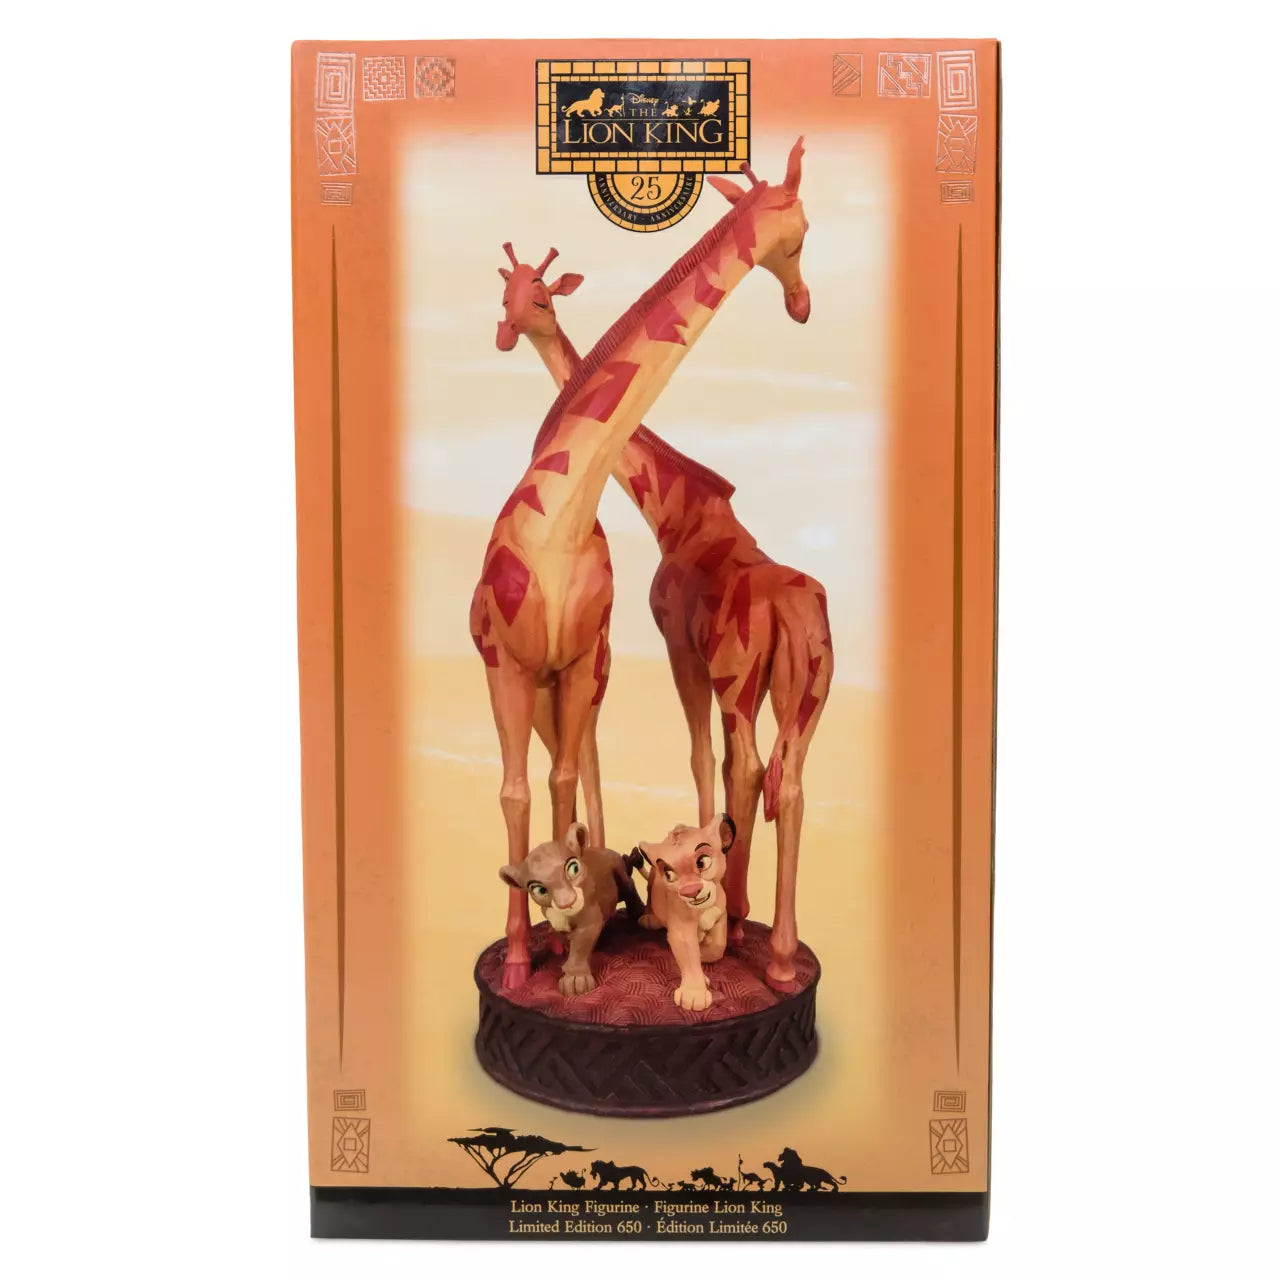 The Lion King 25th Anniversary Figure – Limited Edition